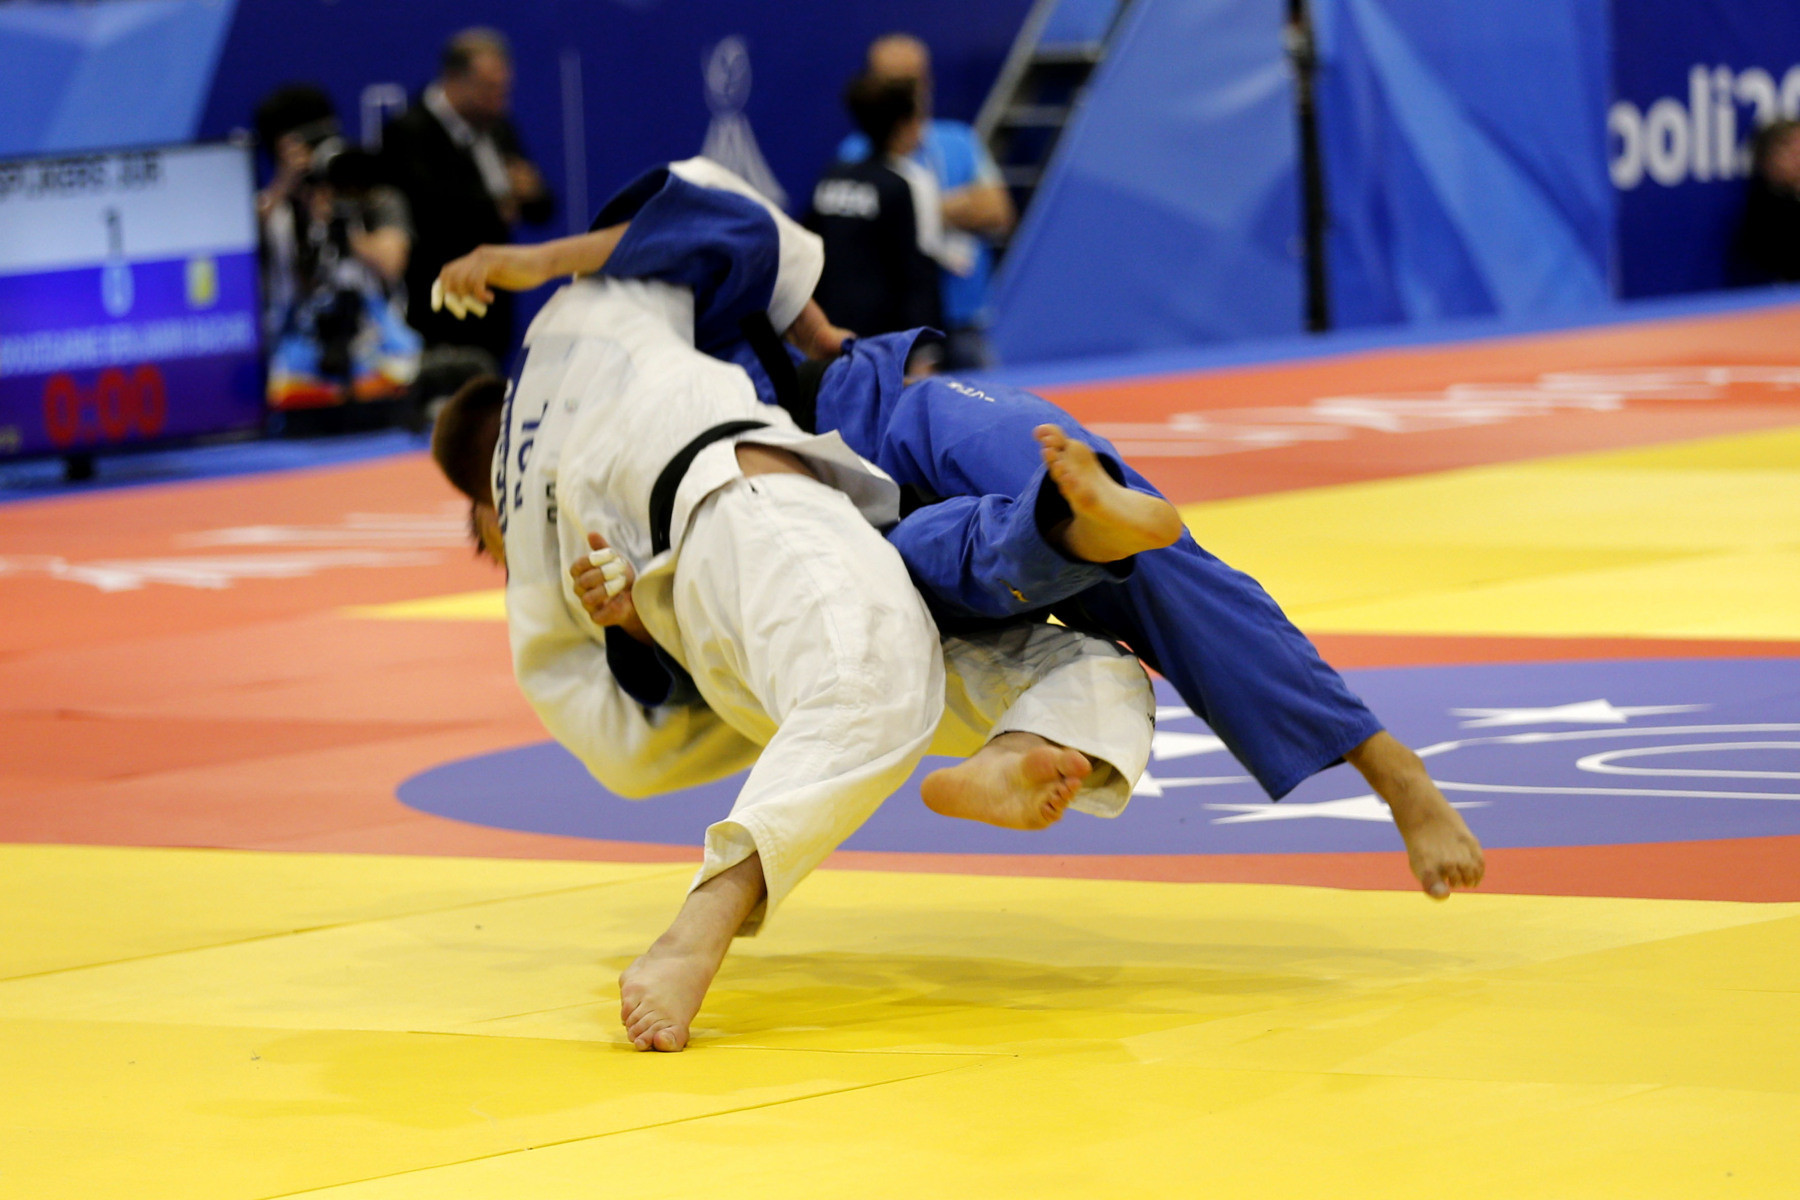 Judo began in the same complex, with the gold medal bouts in the women's under-70kg and men's under-90kg taking place ©Naples 2019